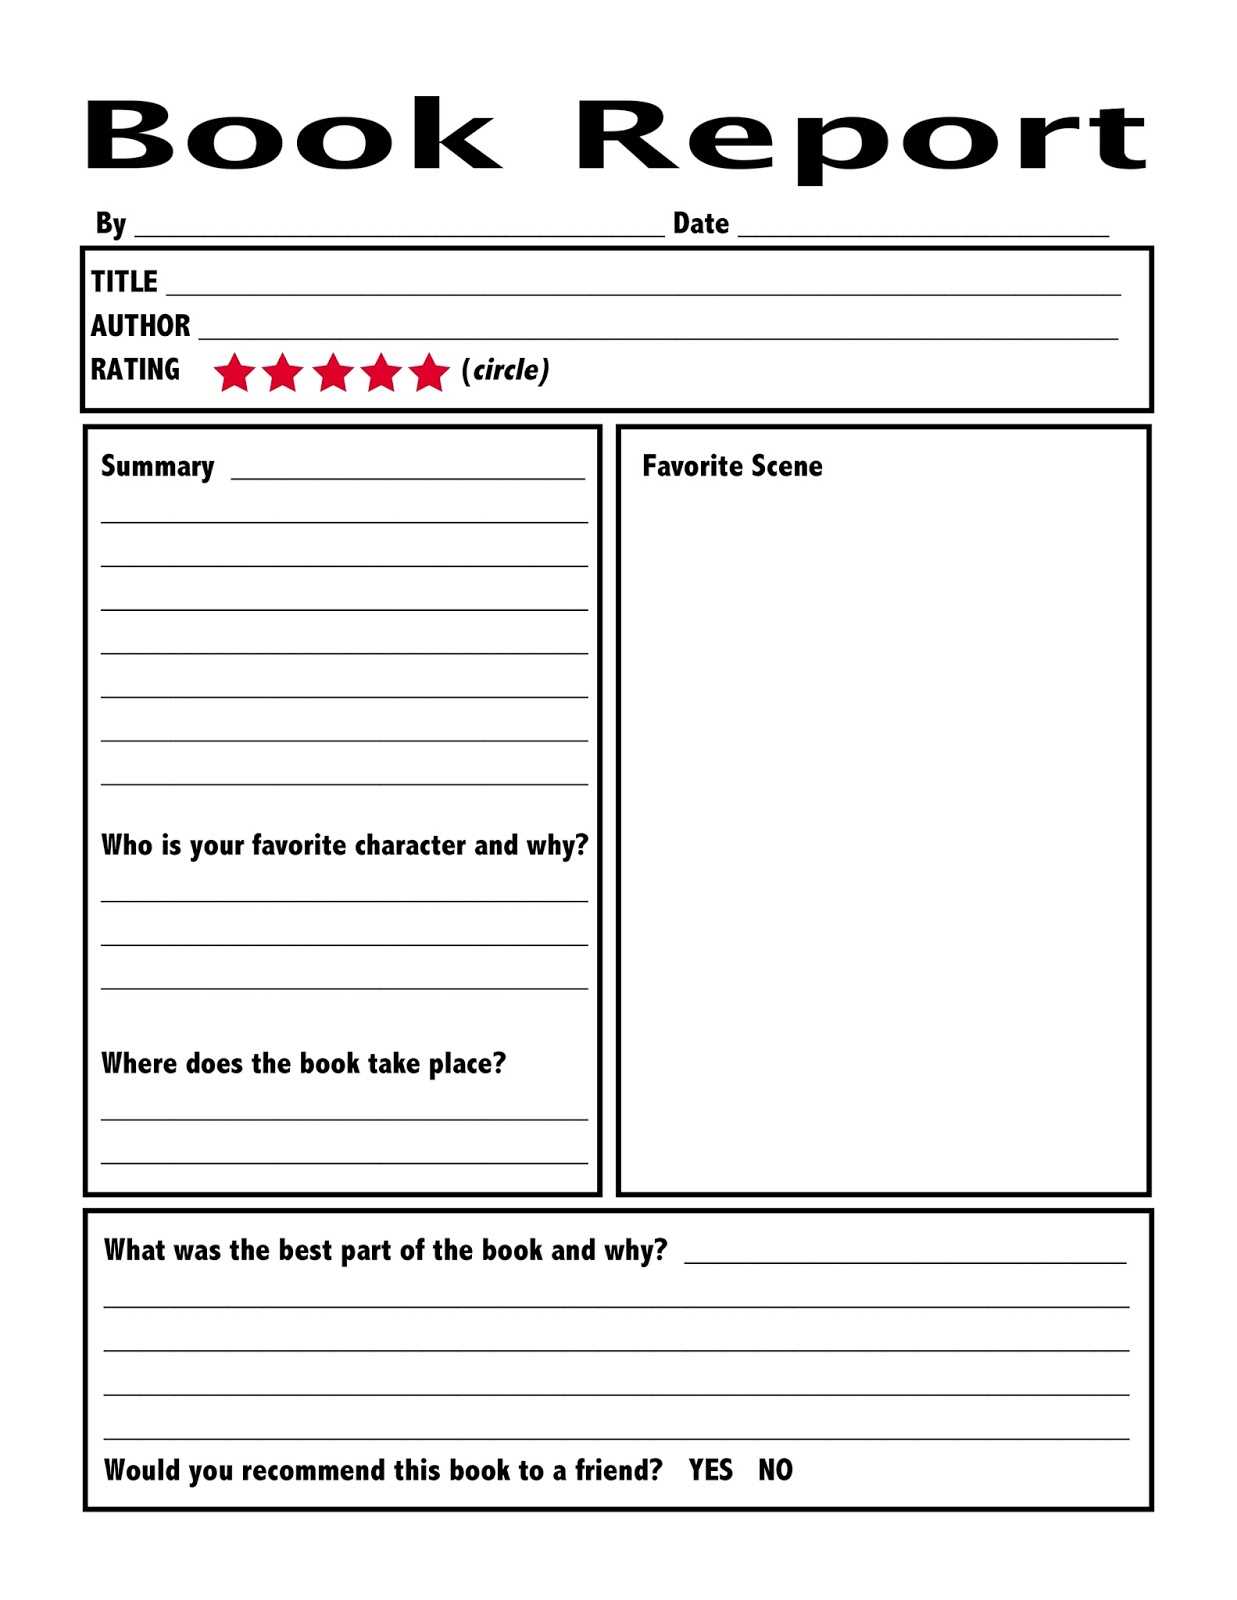 Book Report Writing Examples For Students | Examples In Book Report Template Middle School